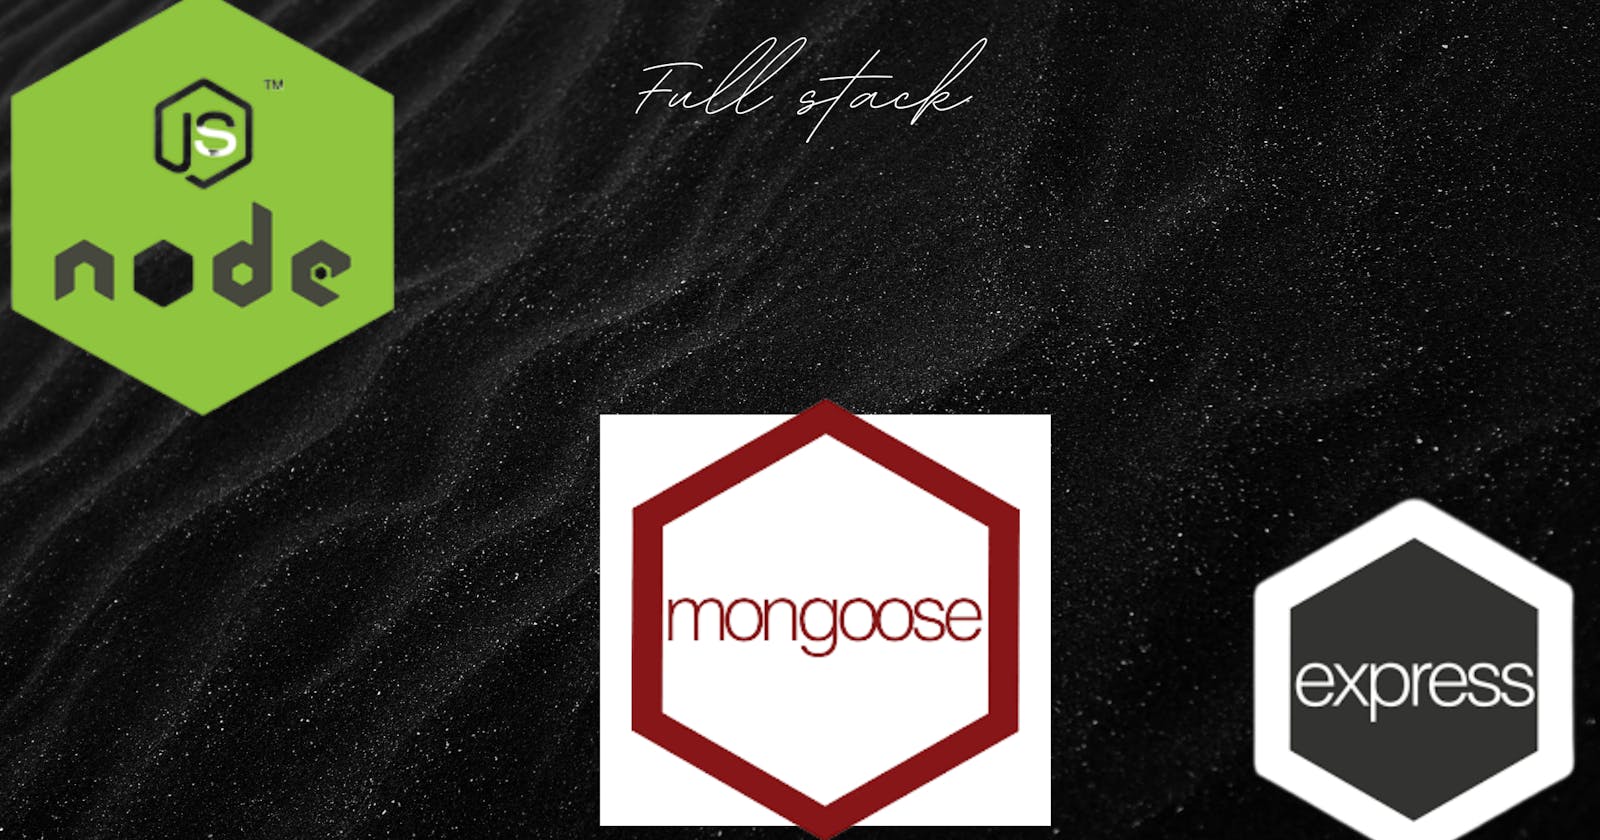 Connecting Node.js To MongoDB Atlas Using Mongoose: A Step-by-Step Guide